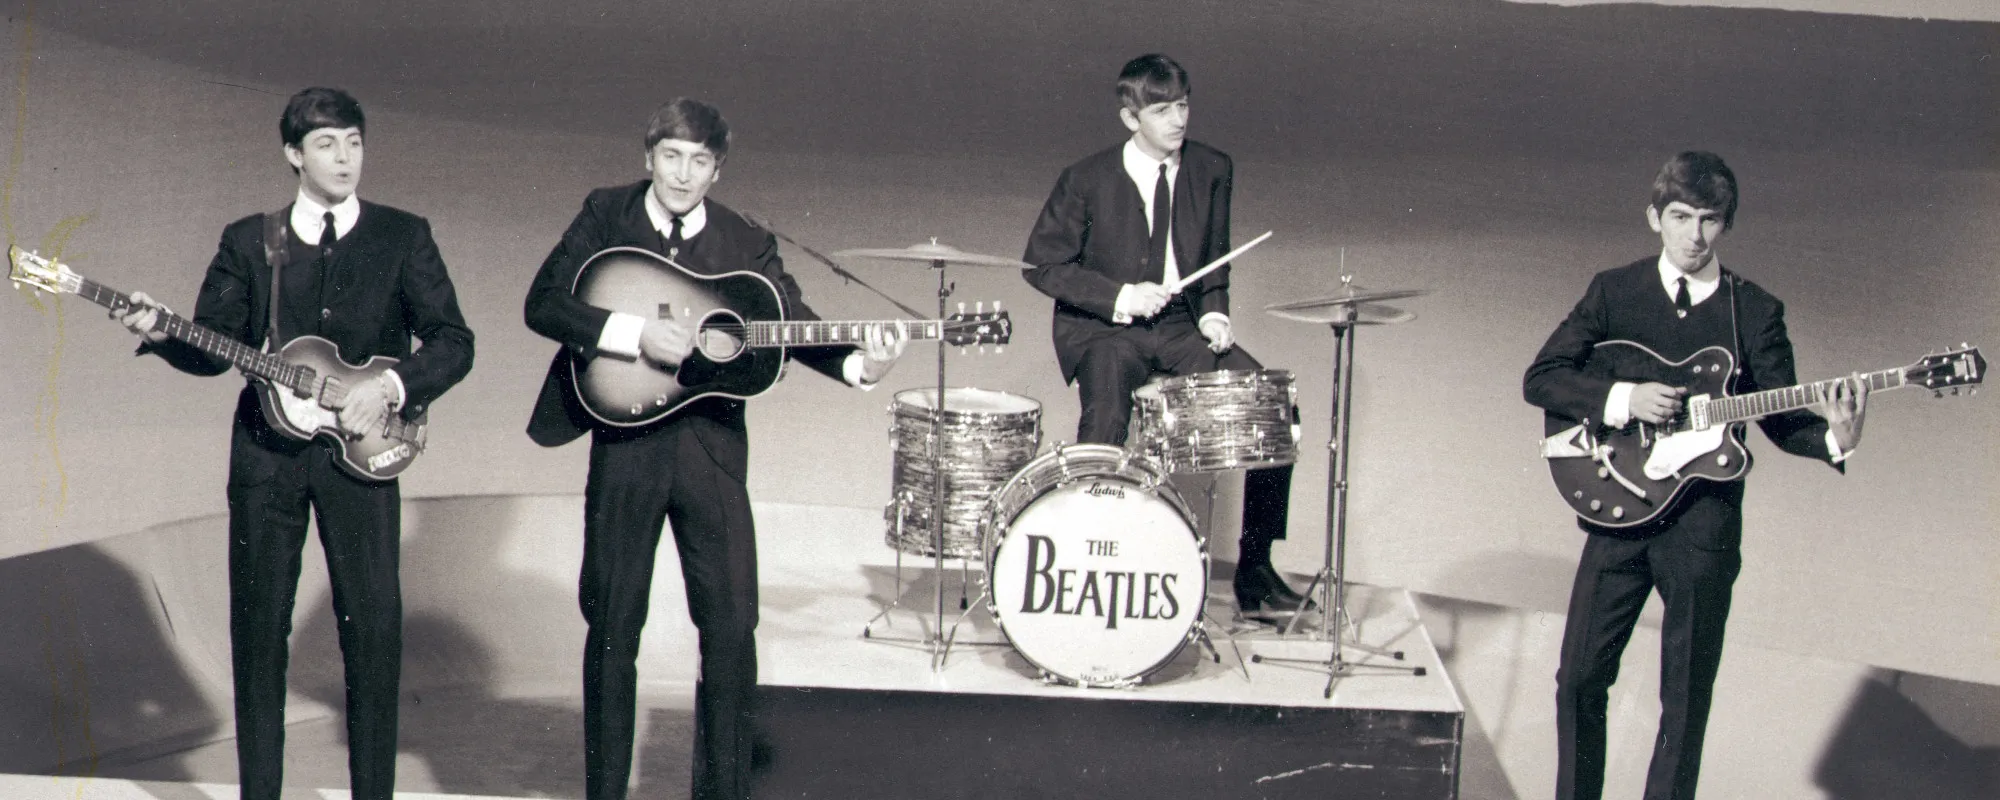 A Couple More Zubes and a Gargle with Milk: The Story Behind “Twist and Shout” by The Beatles